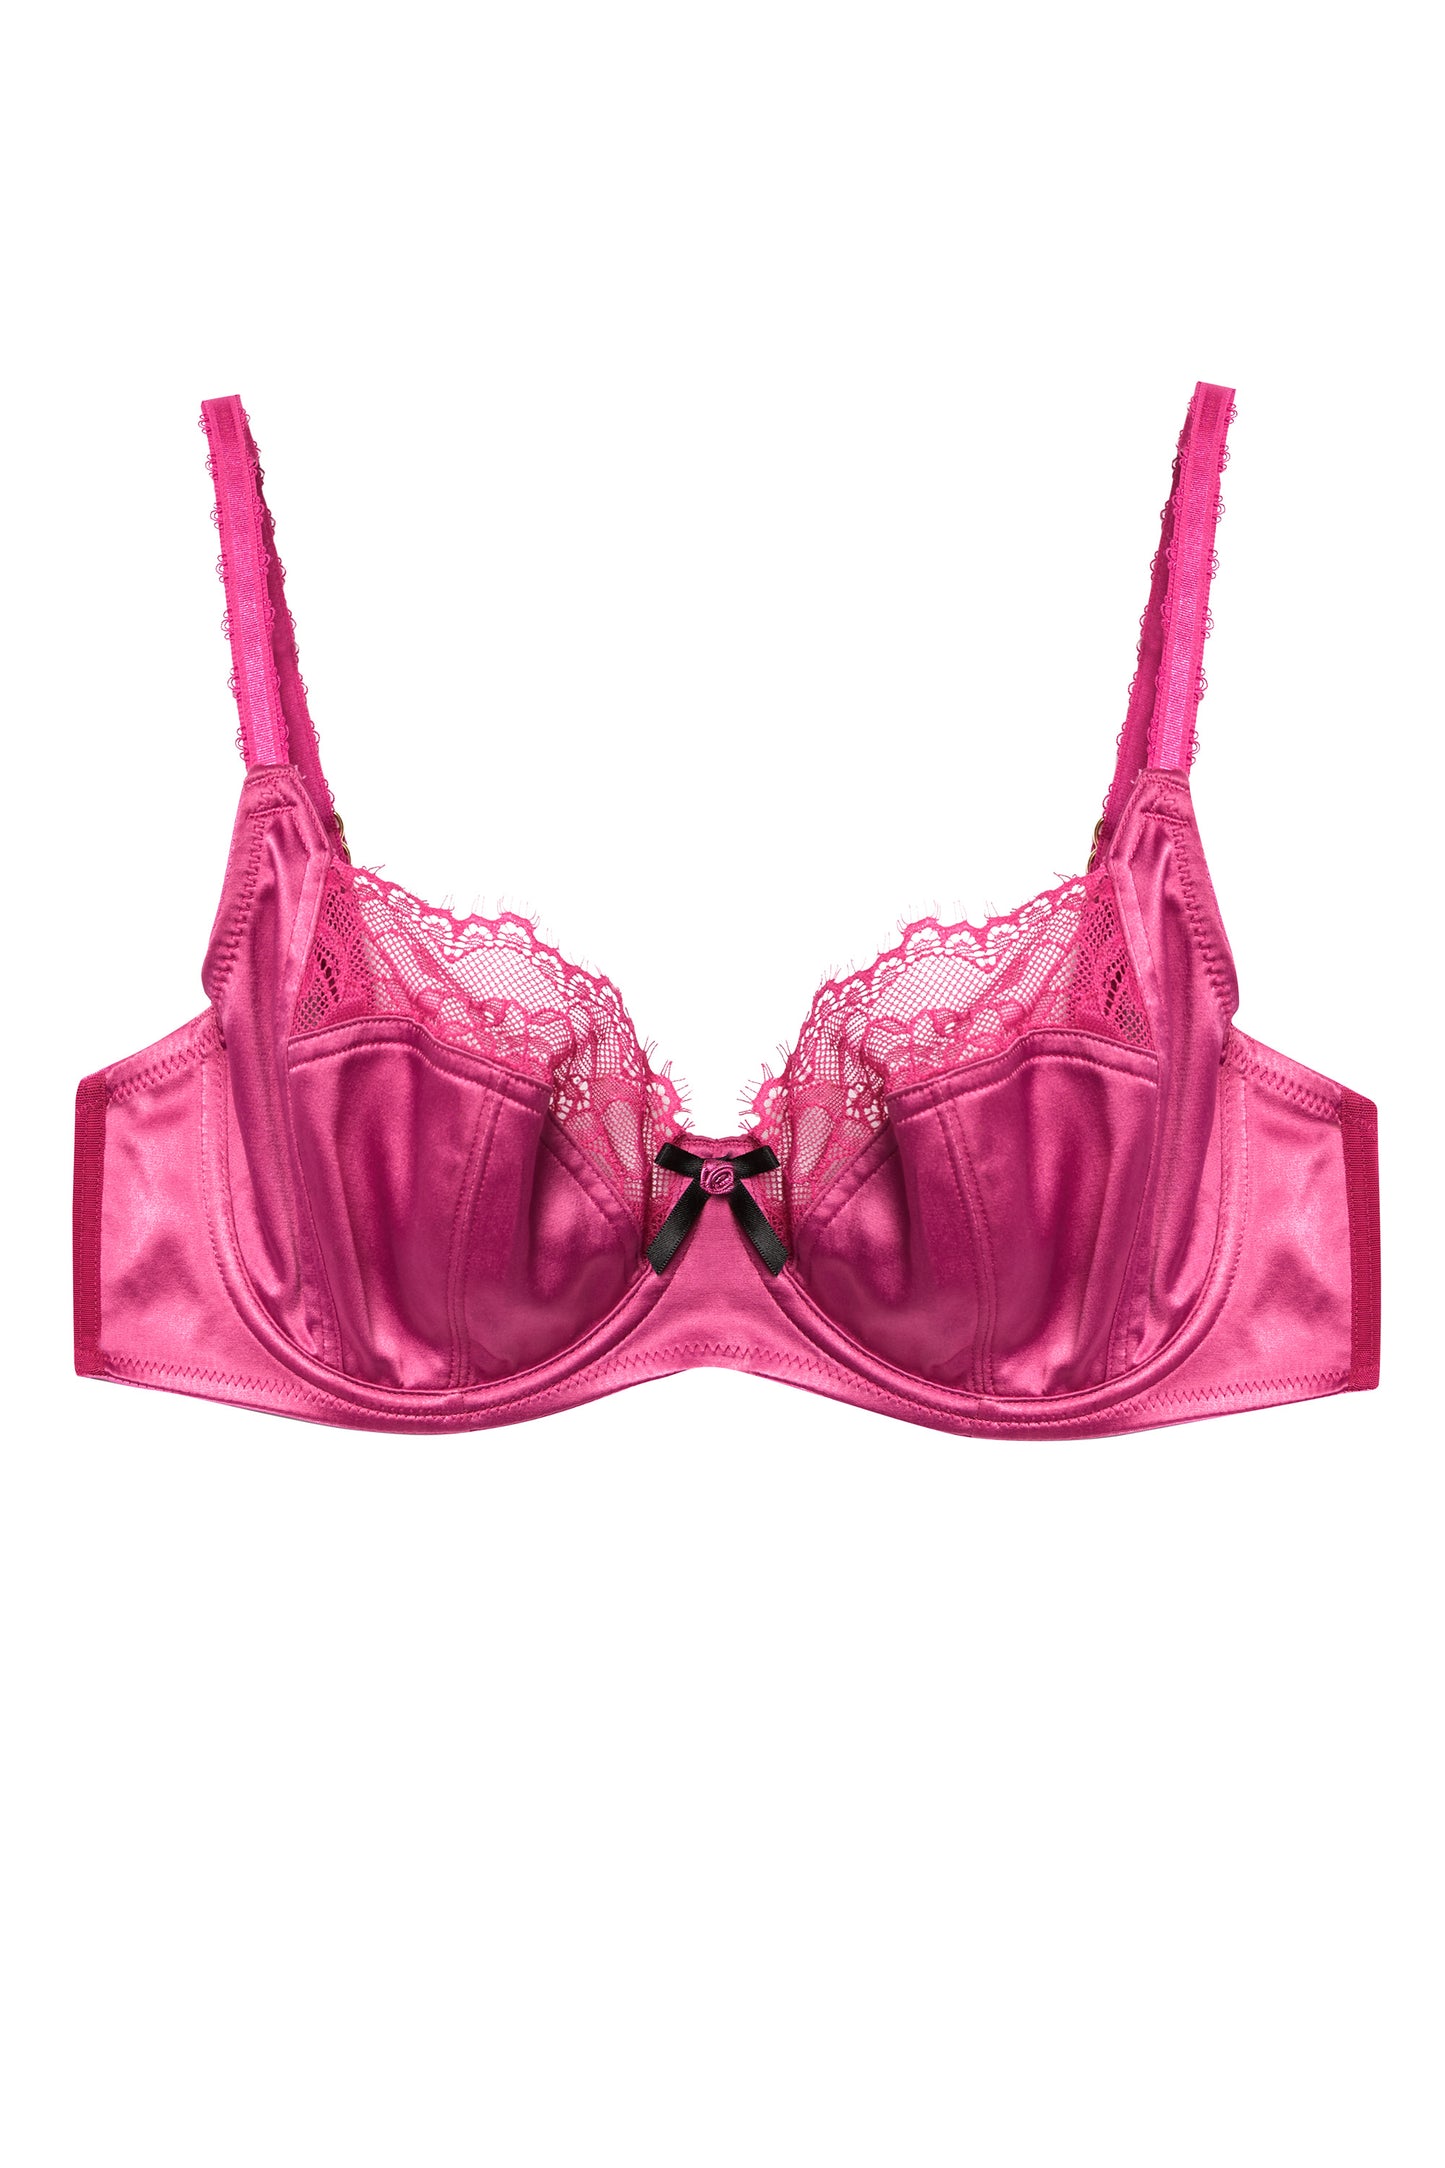 *Rosalyn Magenta Satin Lace Bra - 32-40 bands and D-H cups (UK size) *BUNDLE*